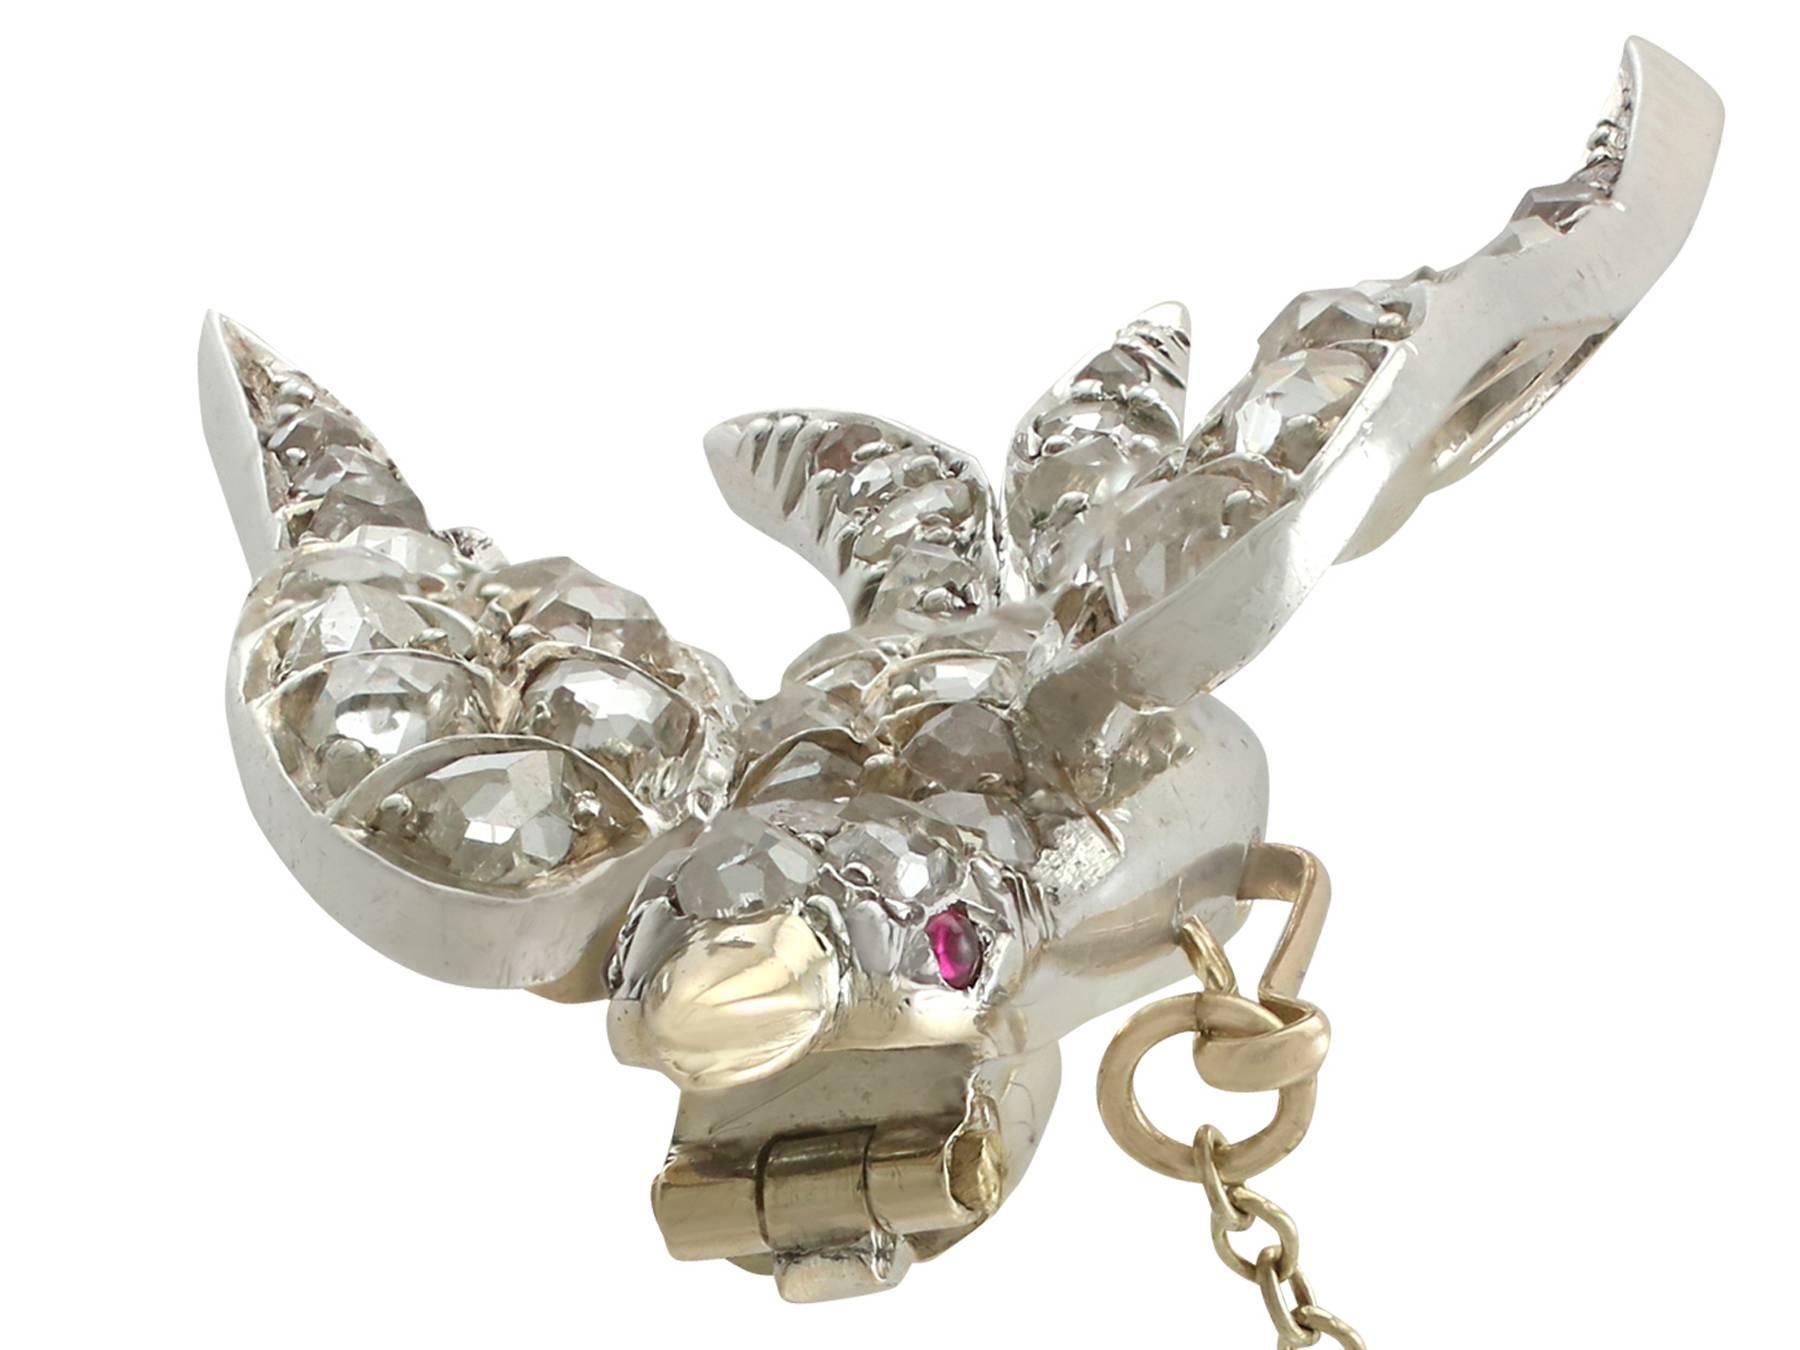 A stunning Victorian 1.95 carat diamond and 0.03 carat ruby, 9 karat yellow gold and silver set 'swallow' brooch; part of our diverse antique jewelry and estate jewelry collections.

This stunning, fine and impressive Victorian swallow brooch has